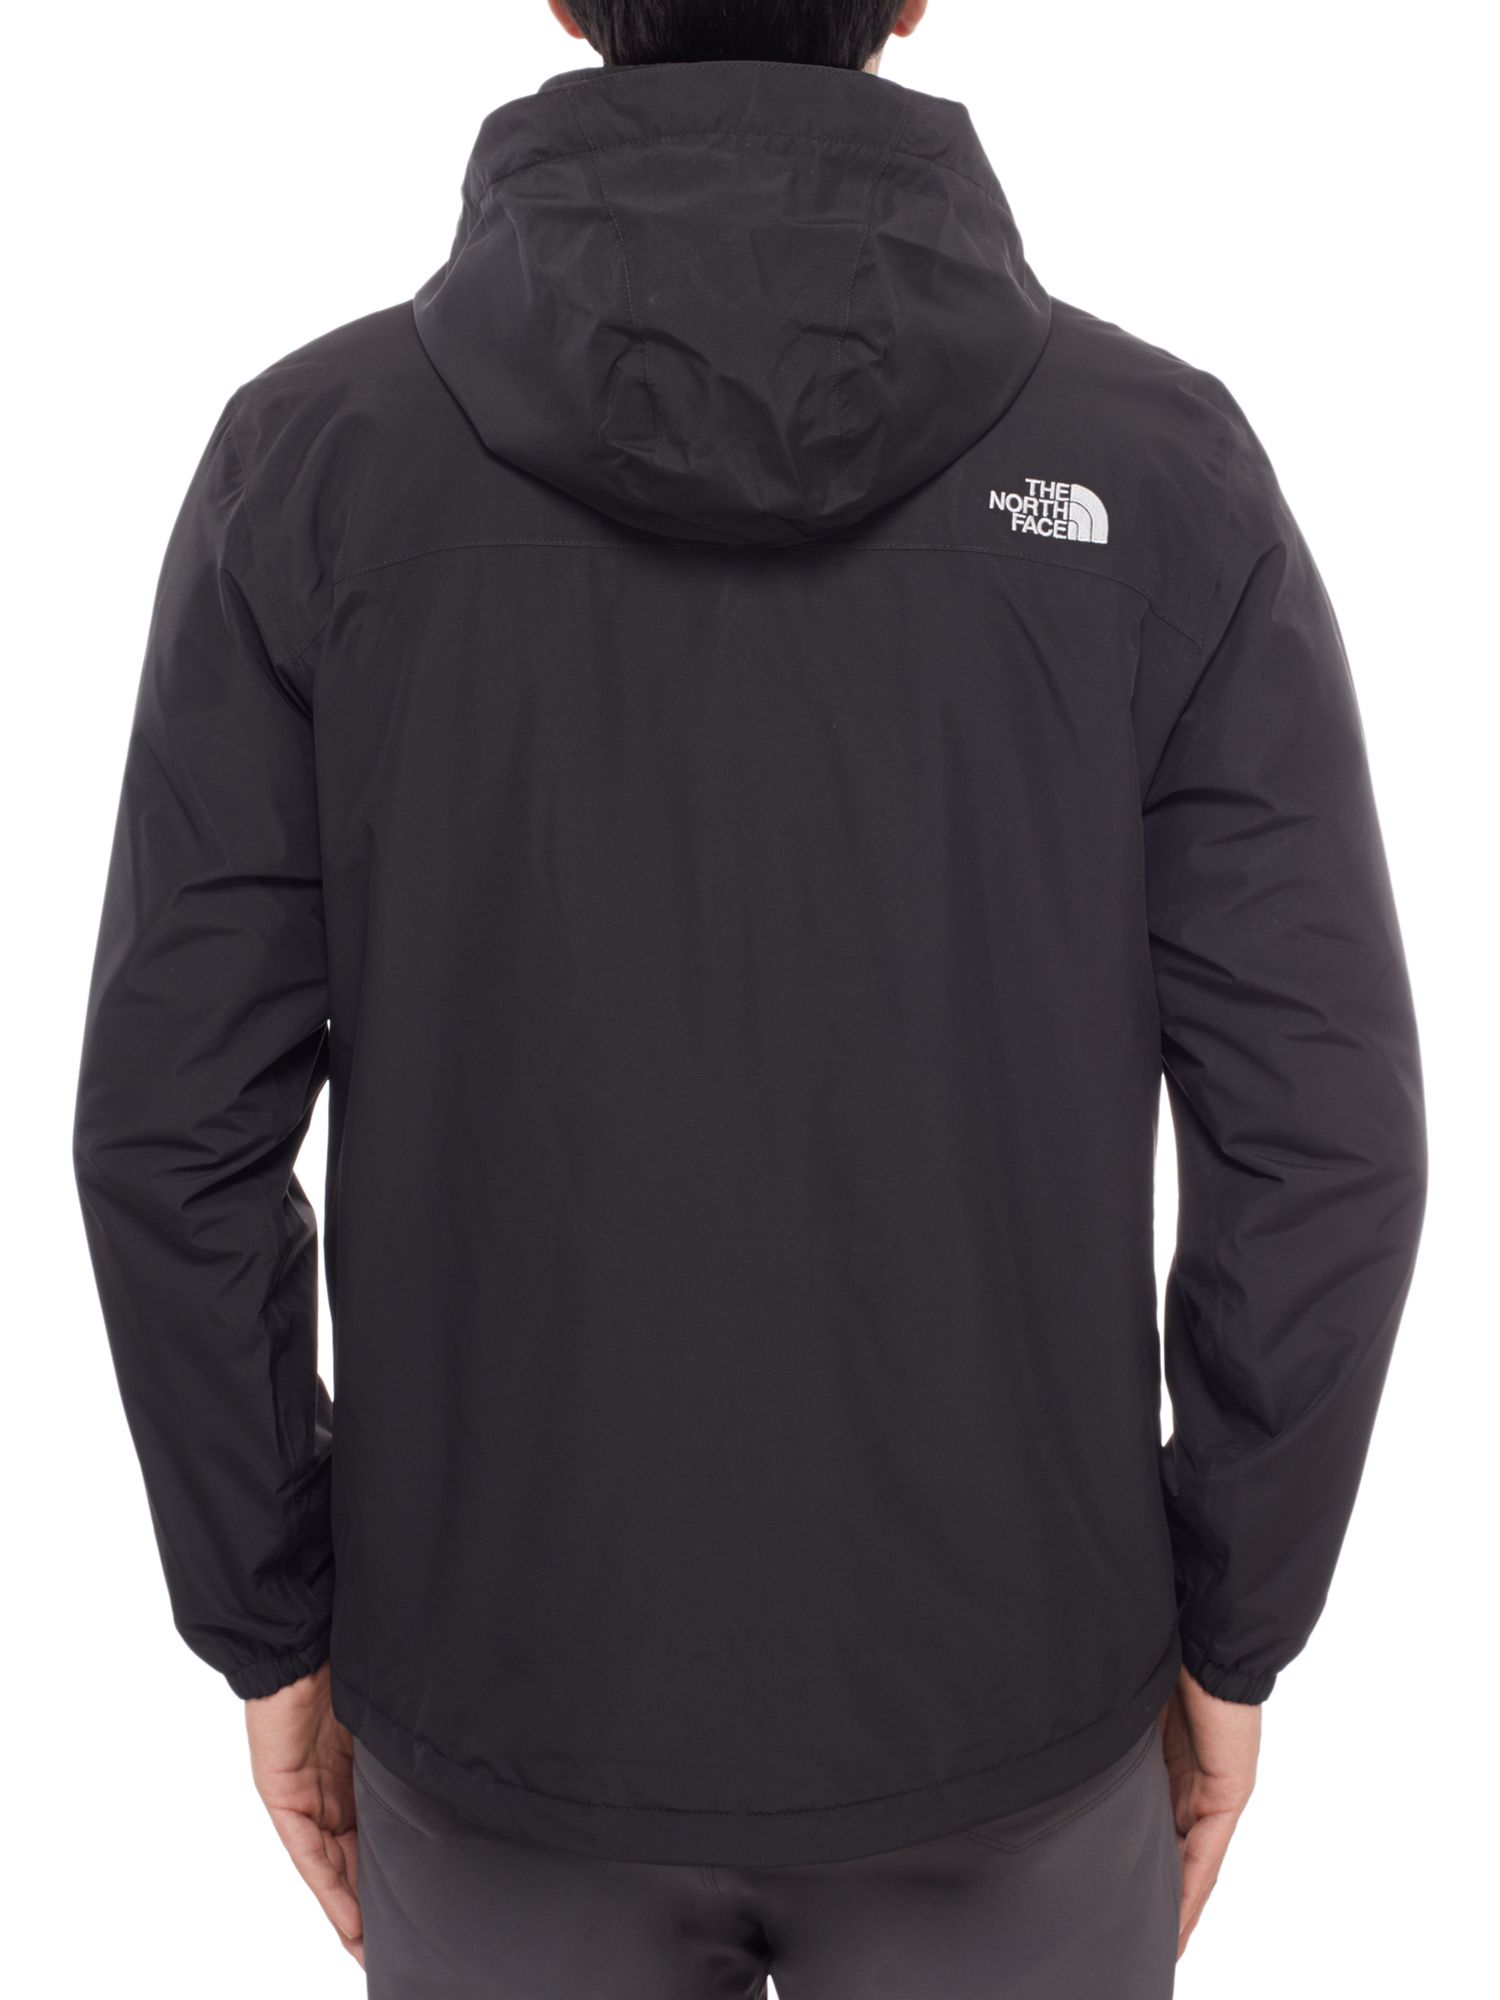 The North Face Resolve Insulated Waterproof Men's Jacket, Black at John ...